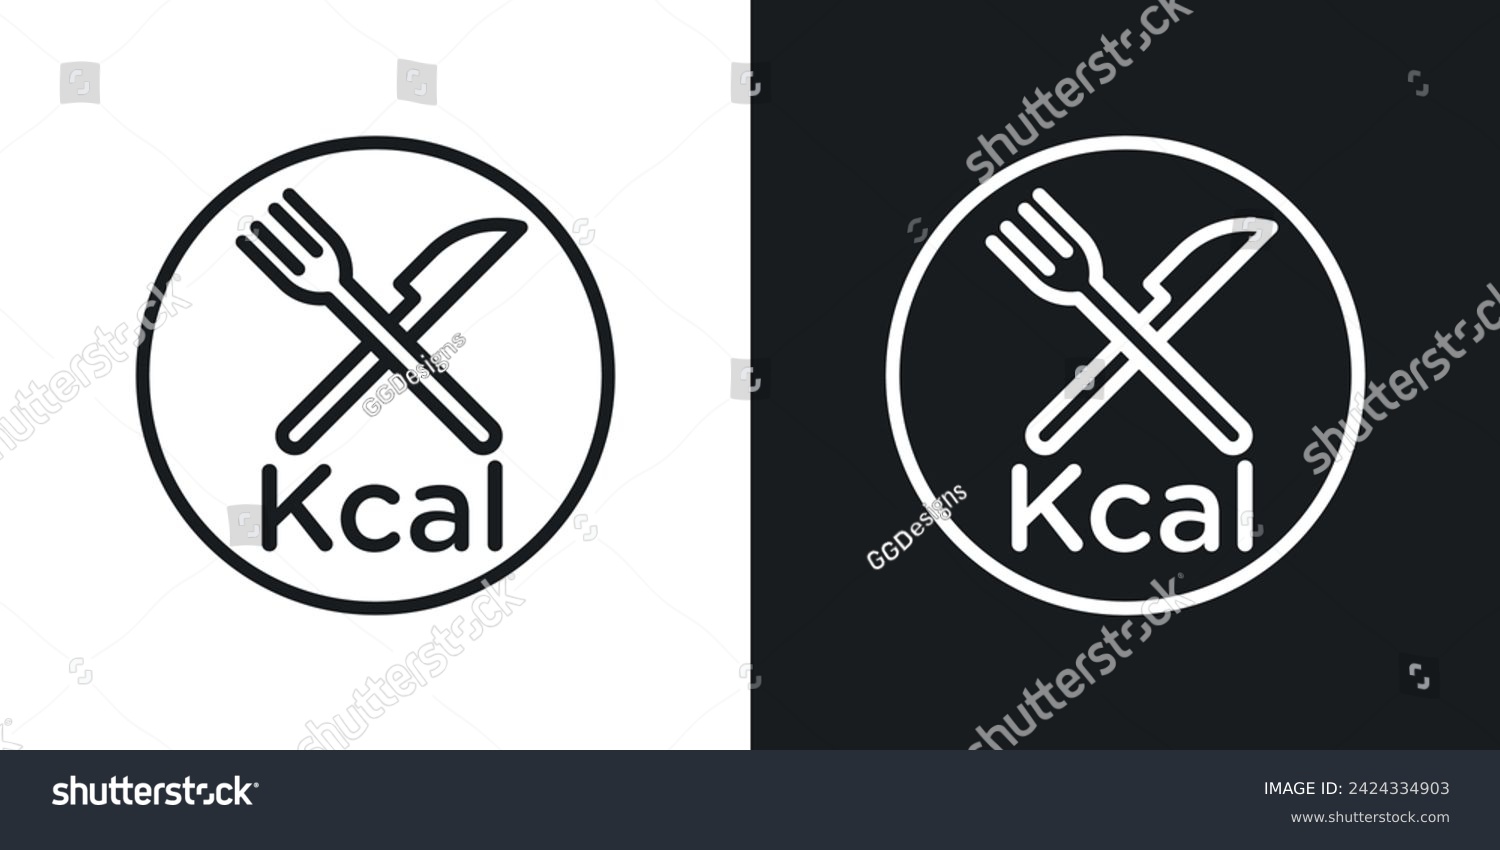 SVG of Kcal Icon Designed in a Line Style on White Background. svg